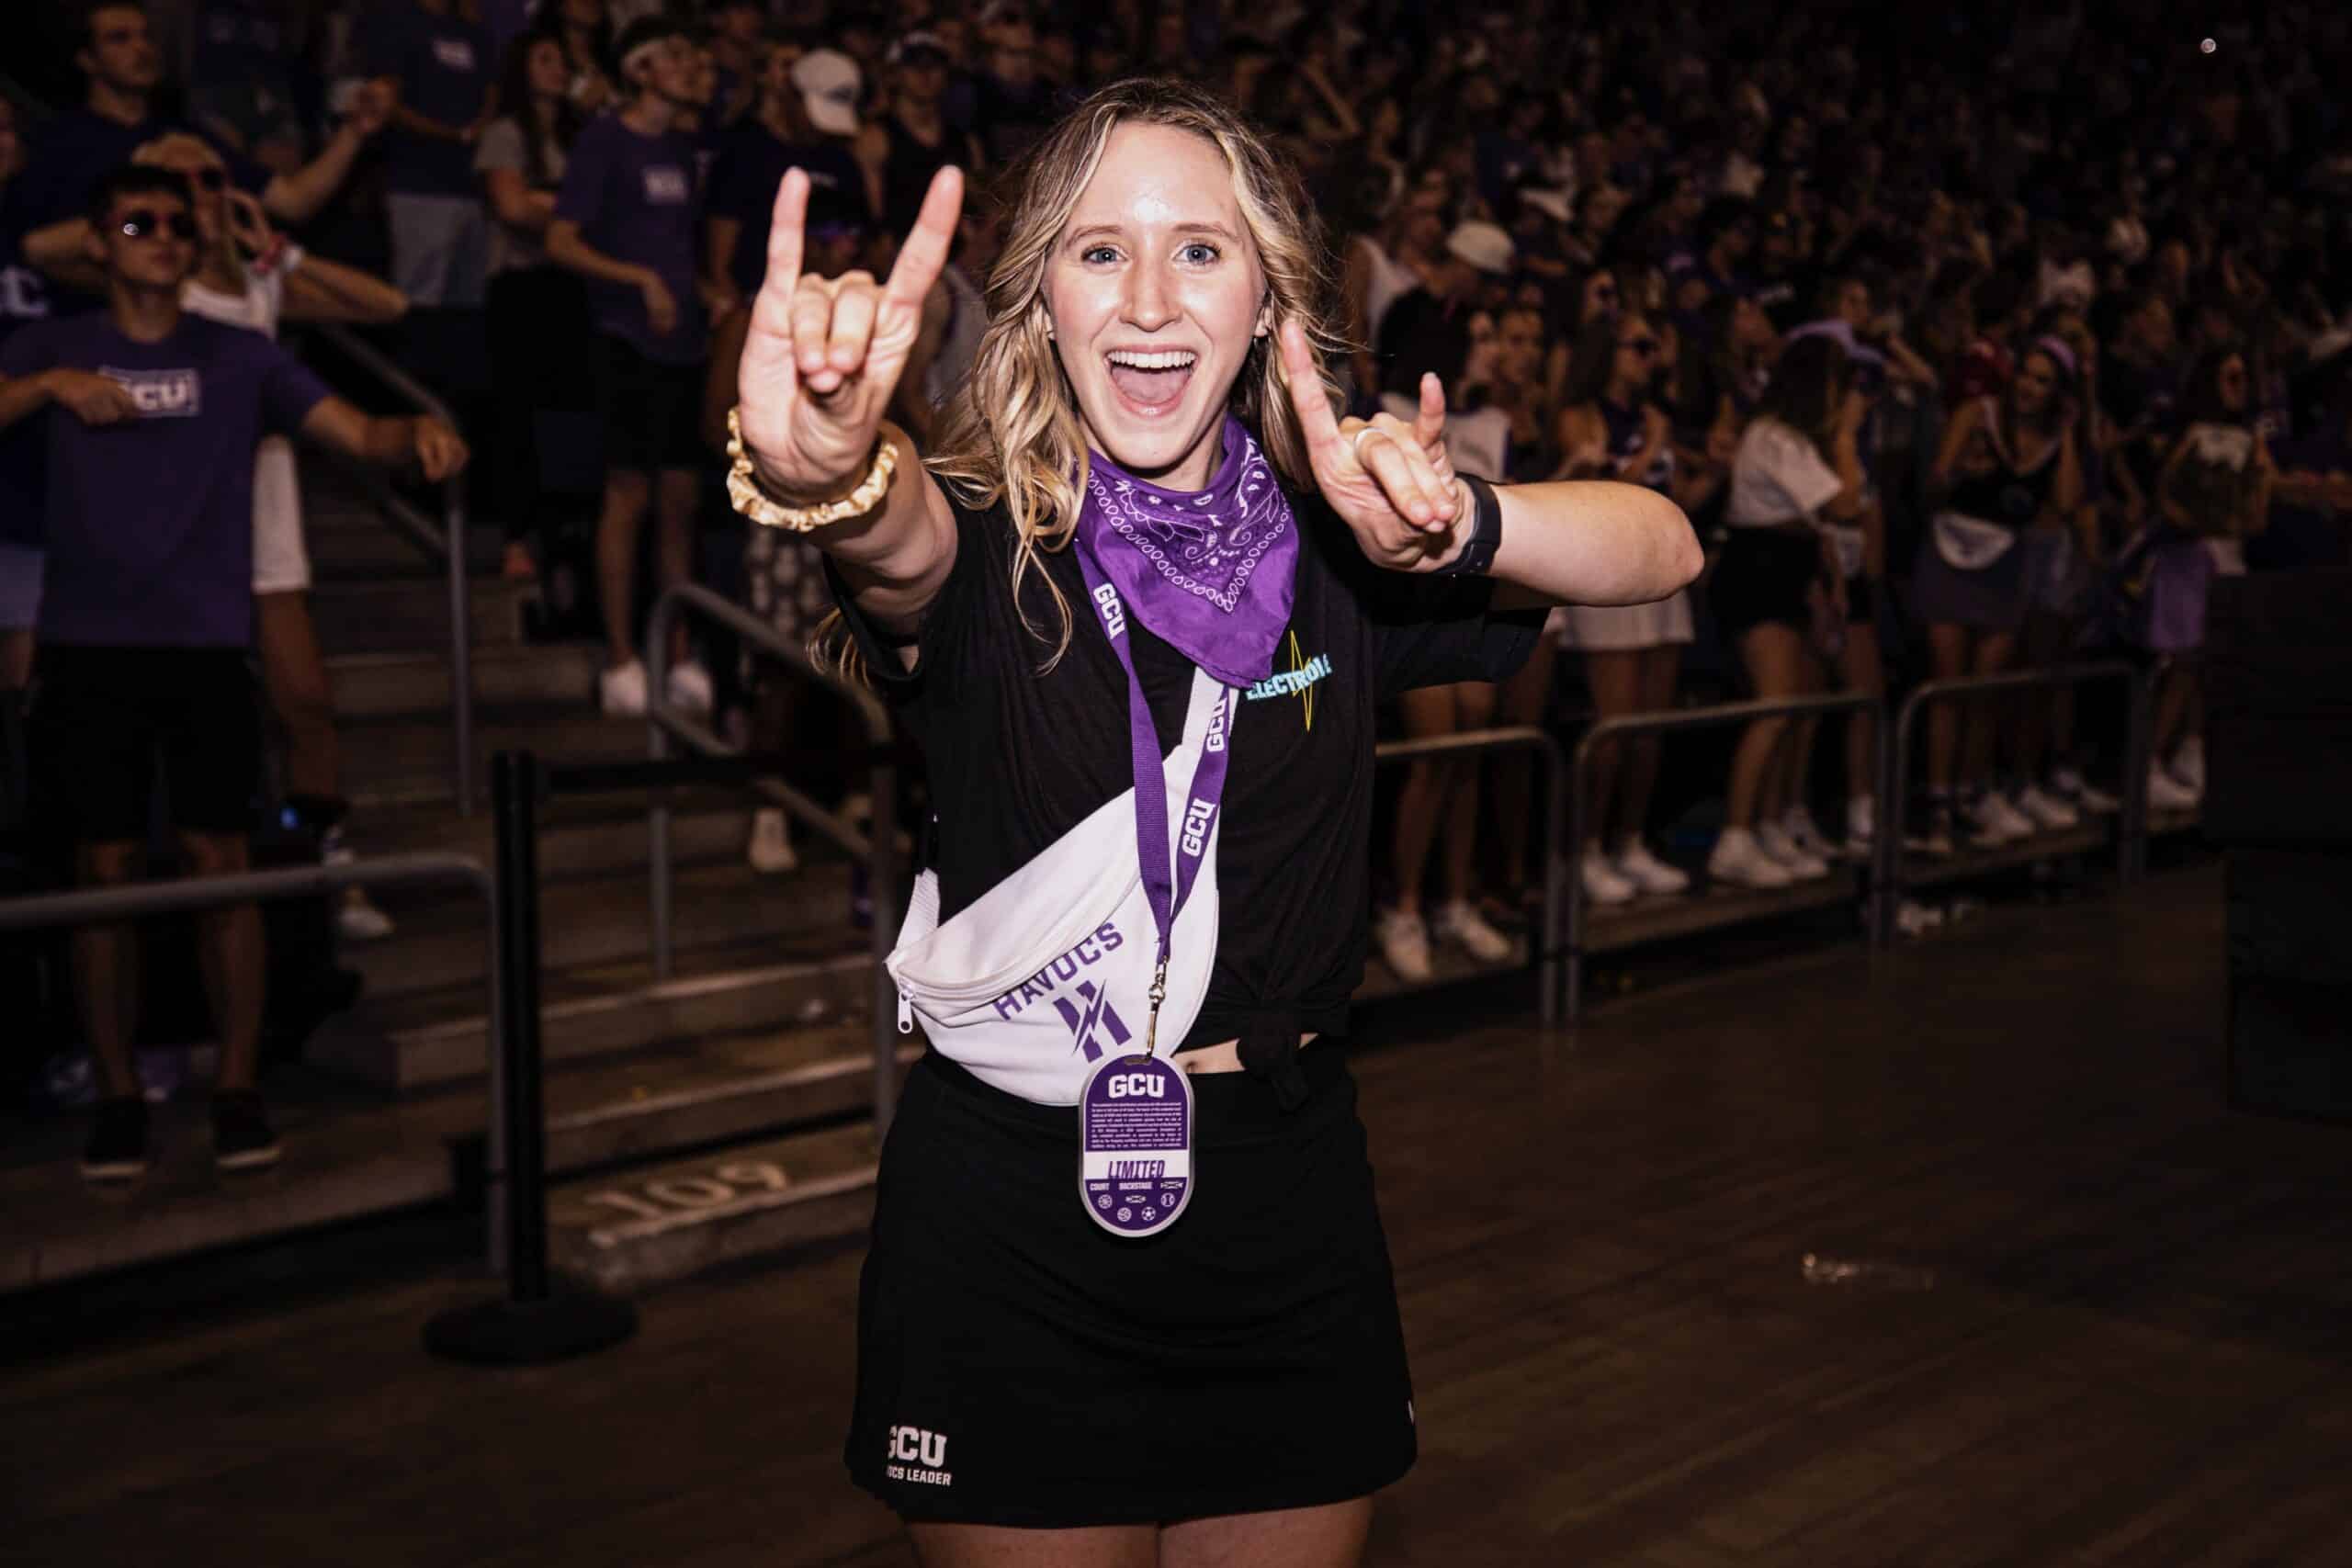 GCU Havocs student section leader motivating the student section on basketball game day.